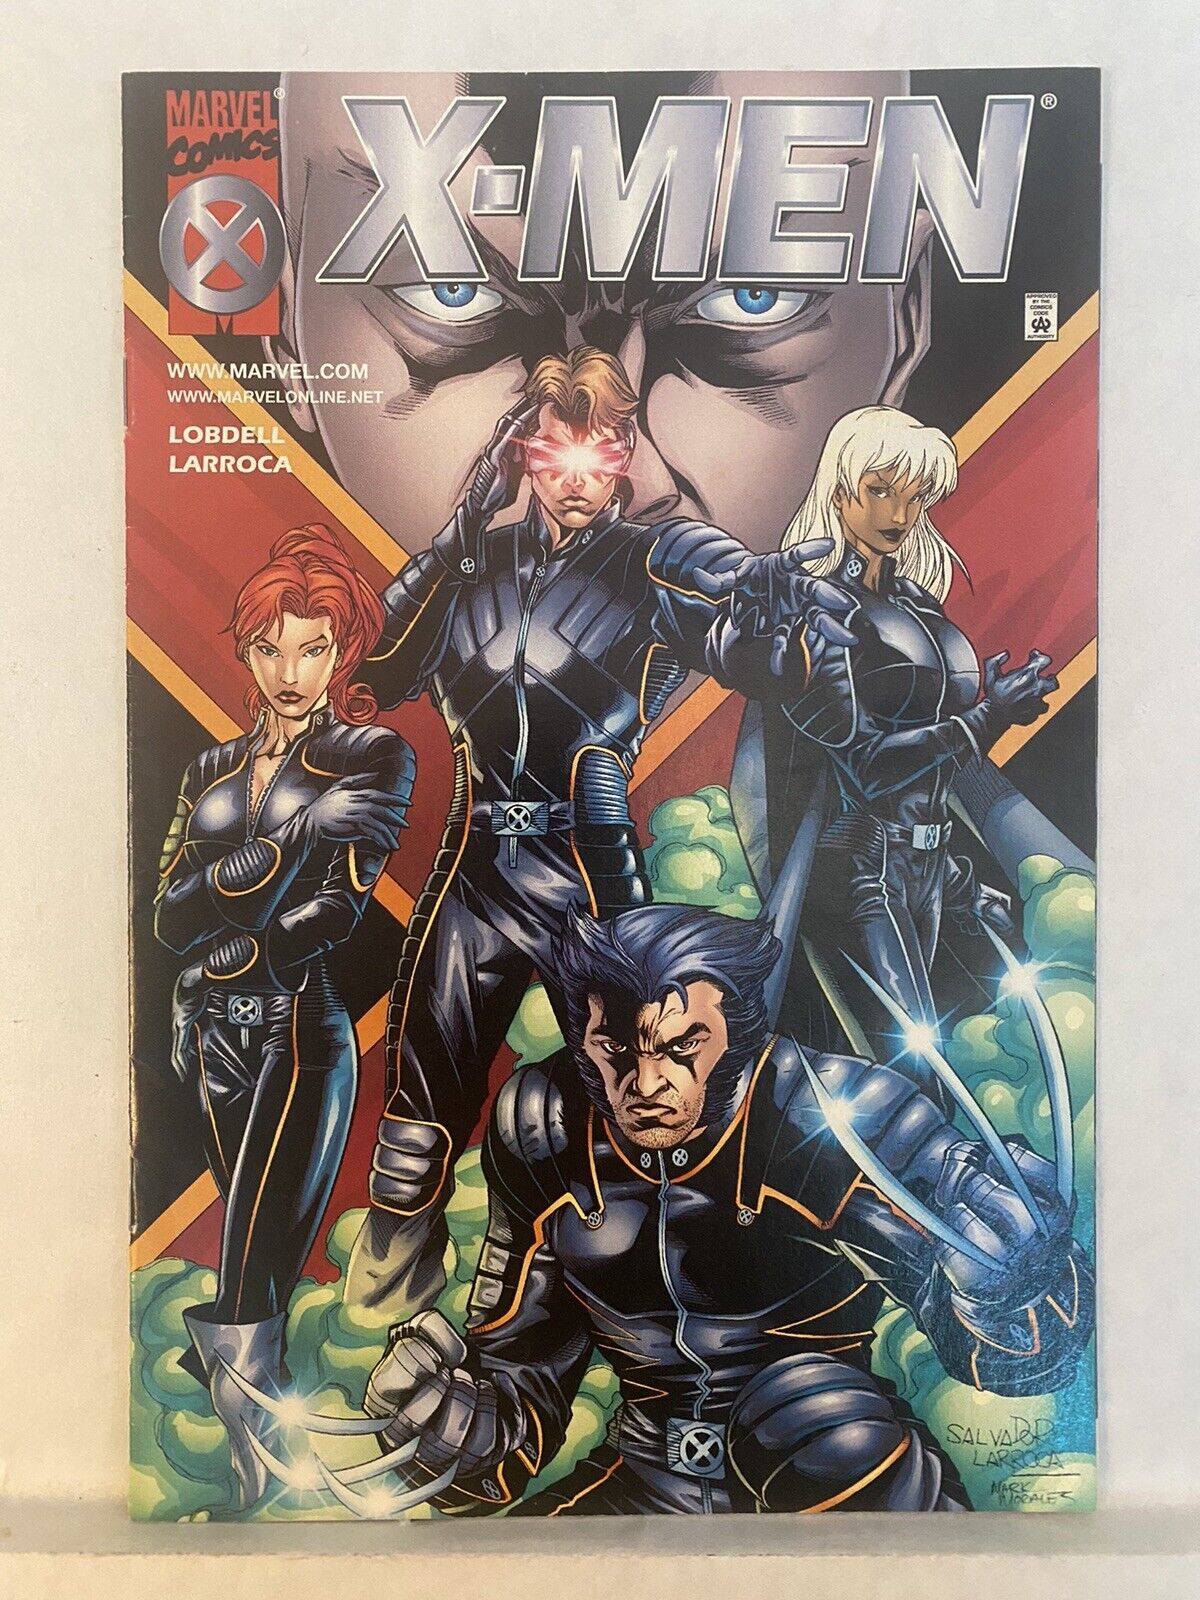 X-Men Iconnect Edition #1 Fine (6.0) January 2001 / Promo / Variant